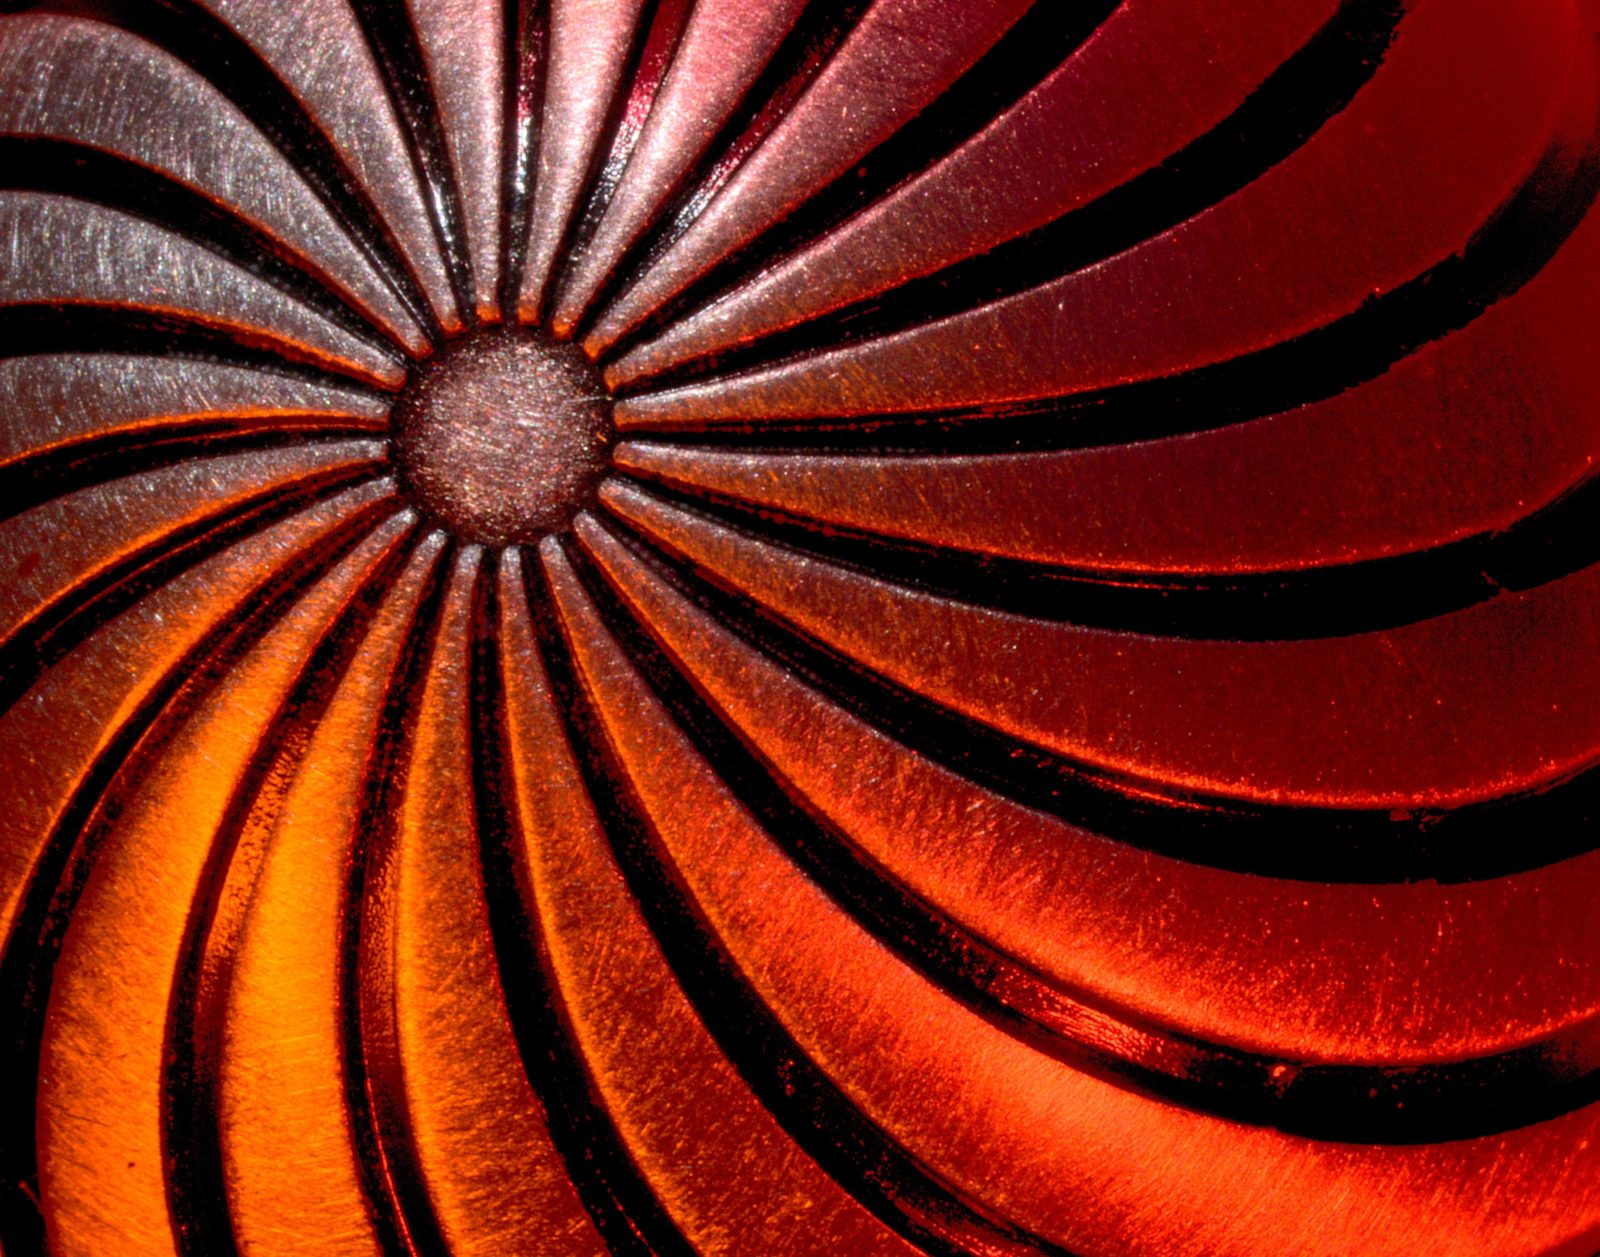 Tequila Sunrise! Close-up view of a metal stopper from a bottle of tequila;